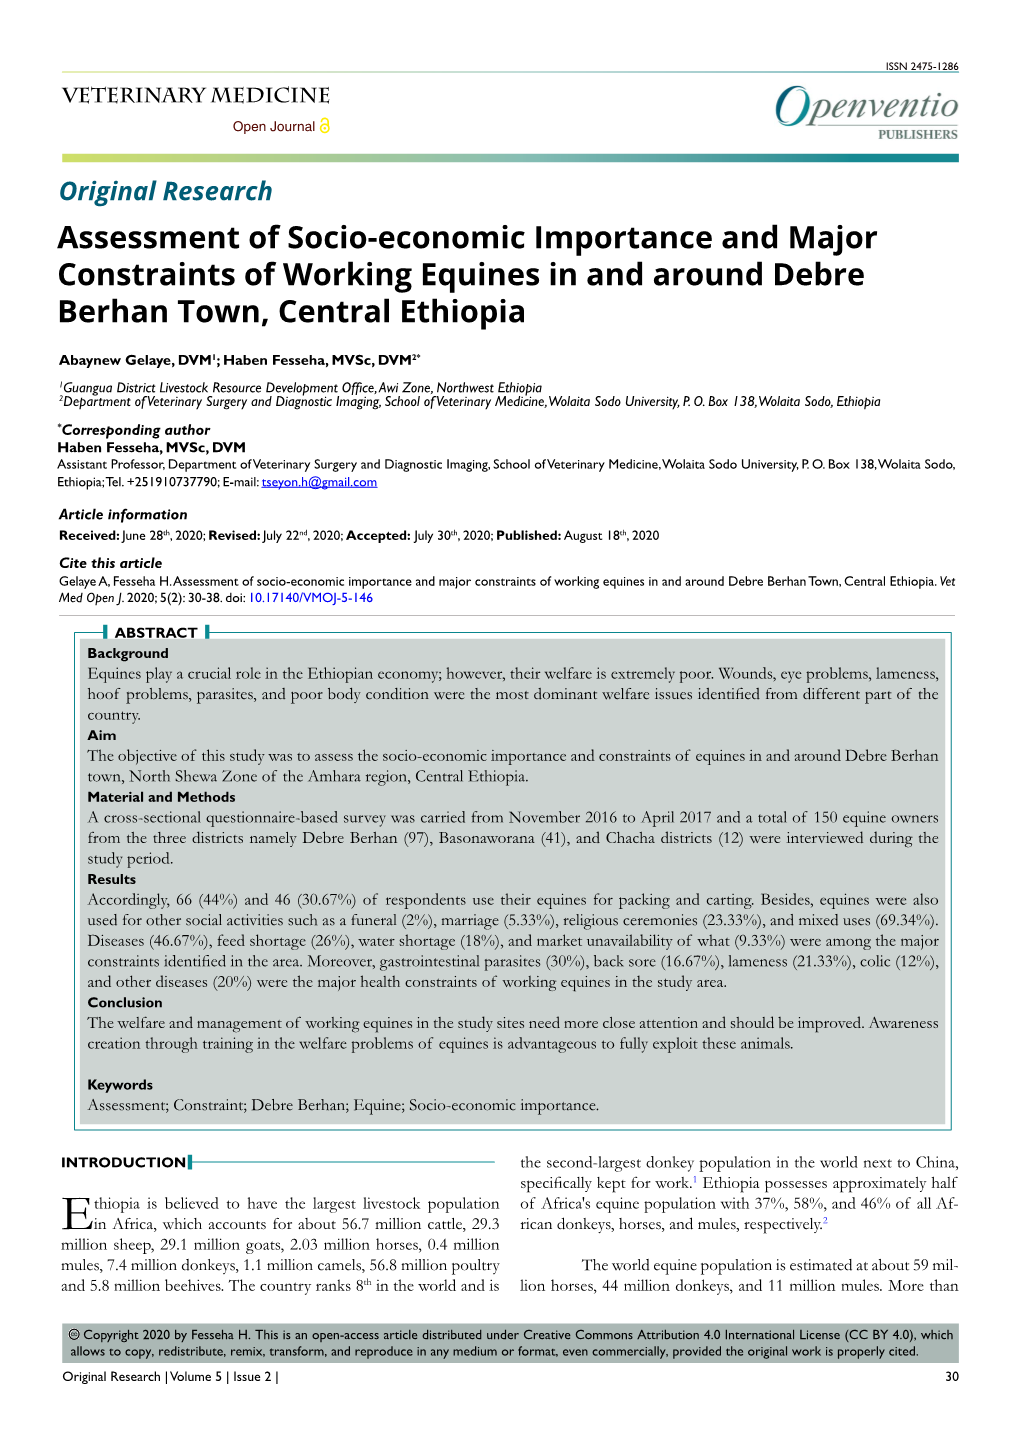 Assessment of Socio-Economic Importance and Major Constraints of Working Equines in and Around Debre Berhan Town, Central Ethiopia